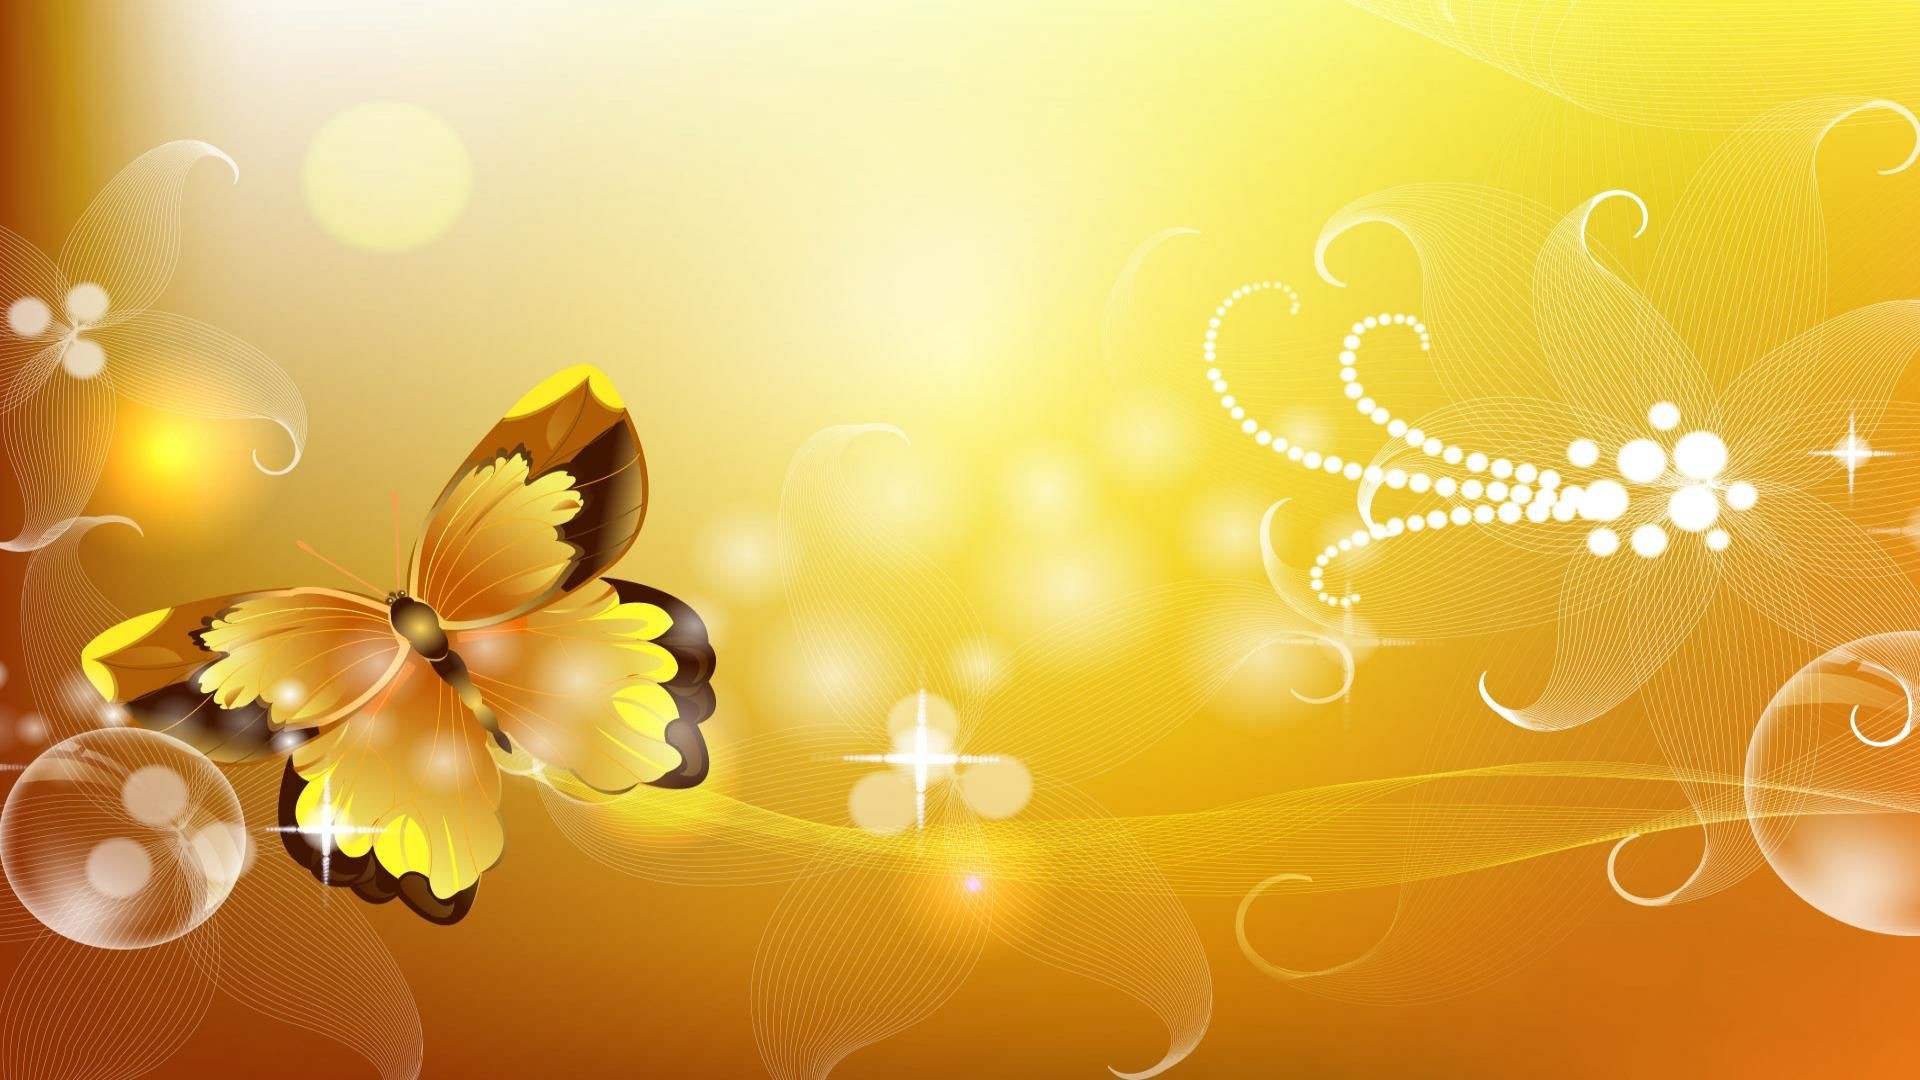 1920x1080 yellow background images HD wallpapers | HDesktops.